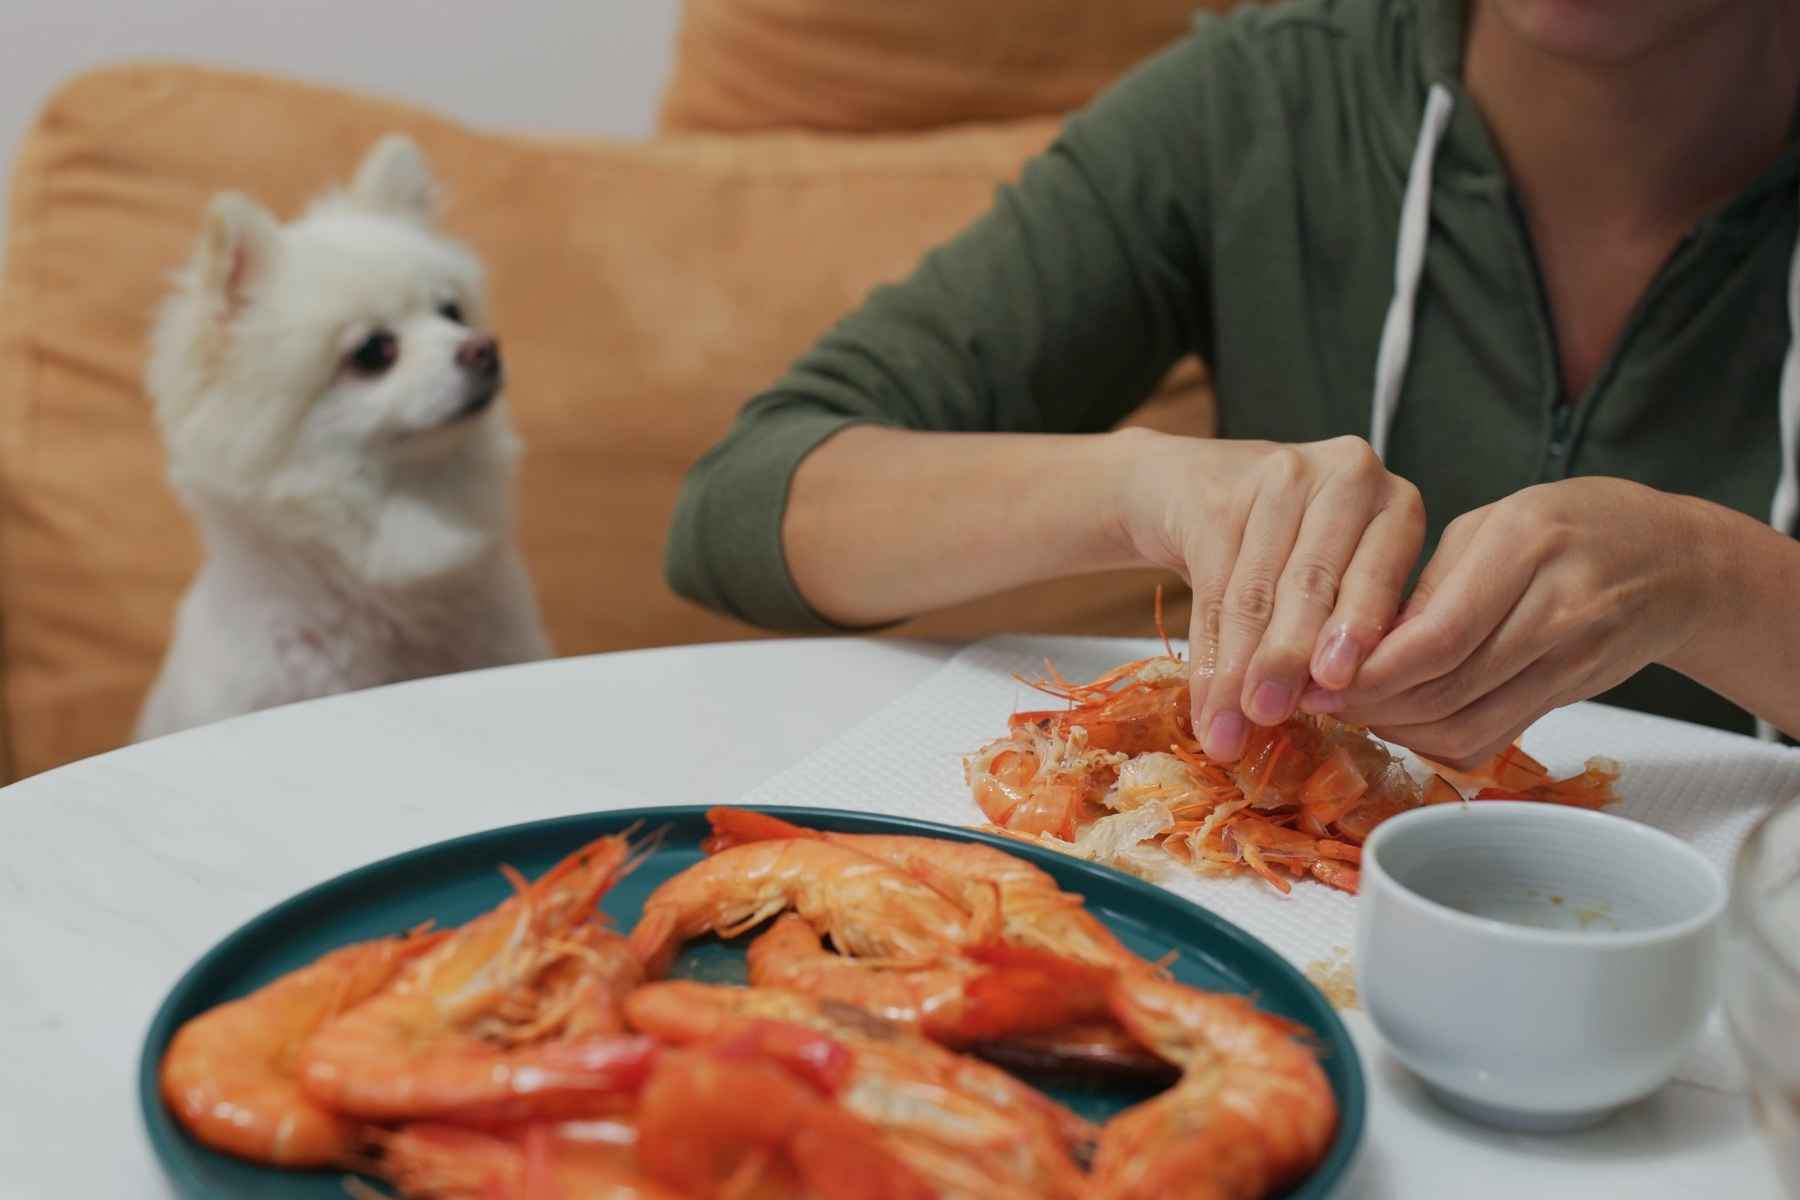 Small white dog watching its owner eat shrimp